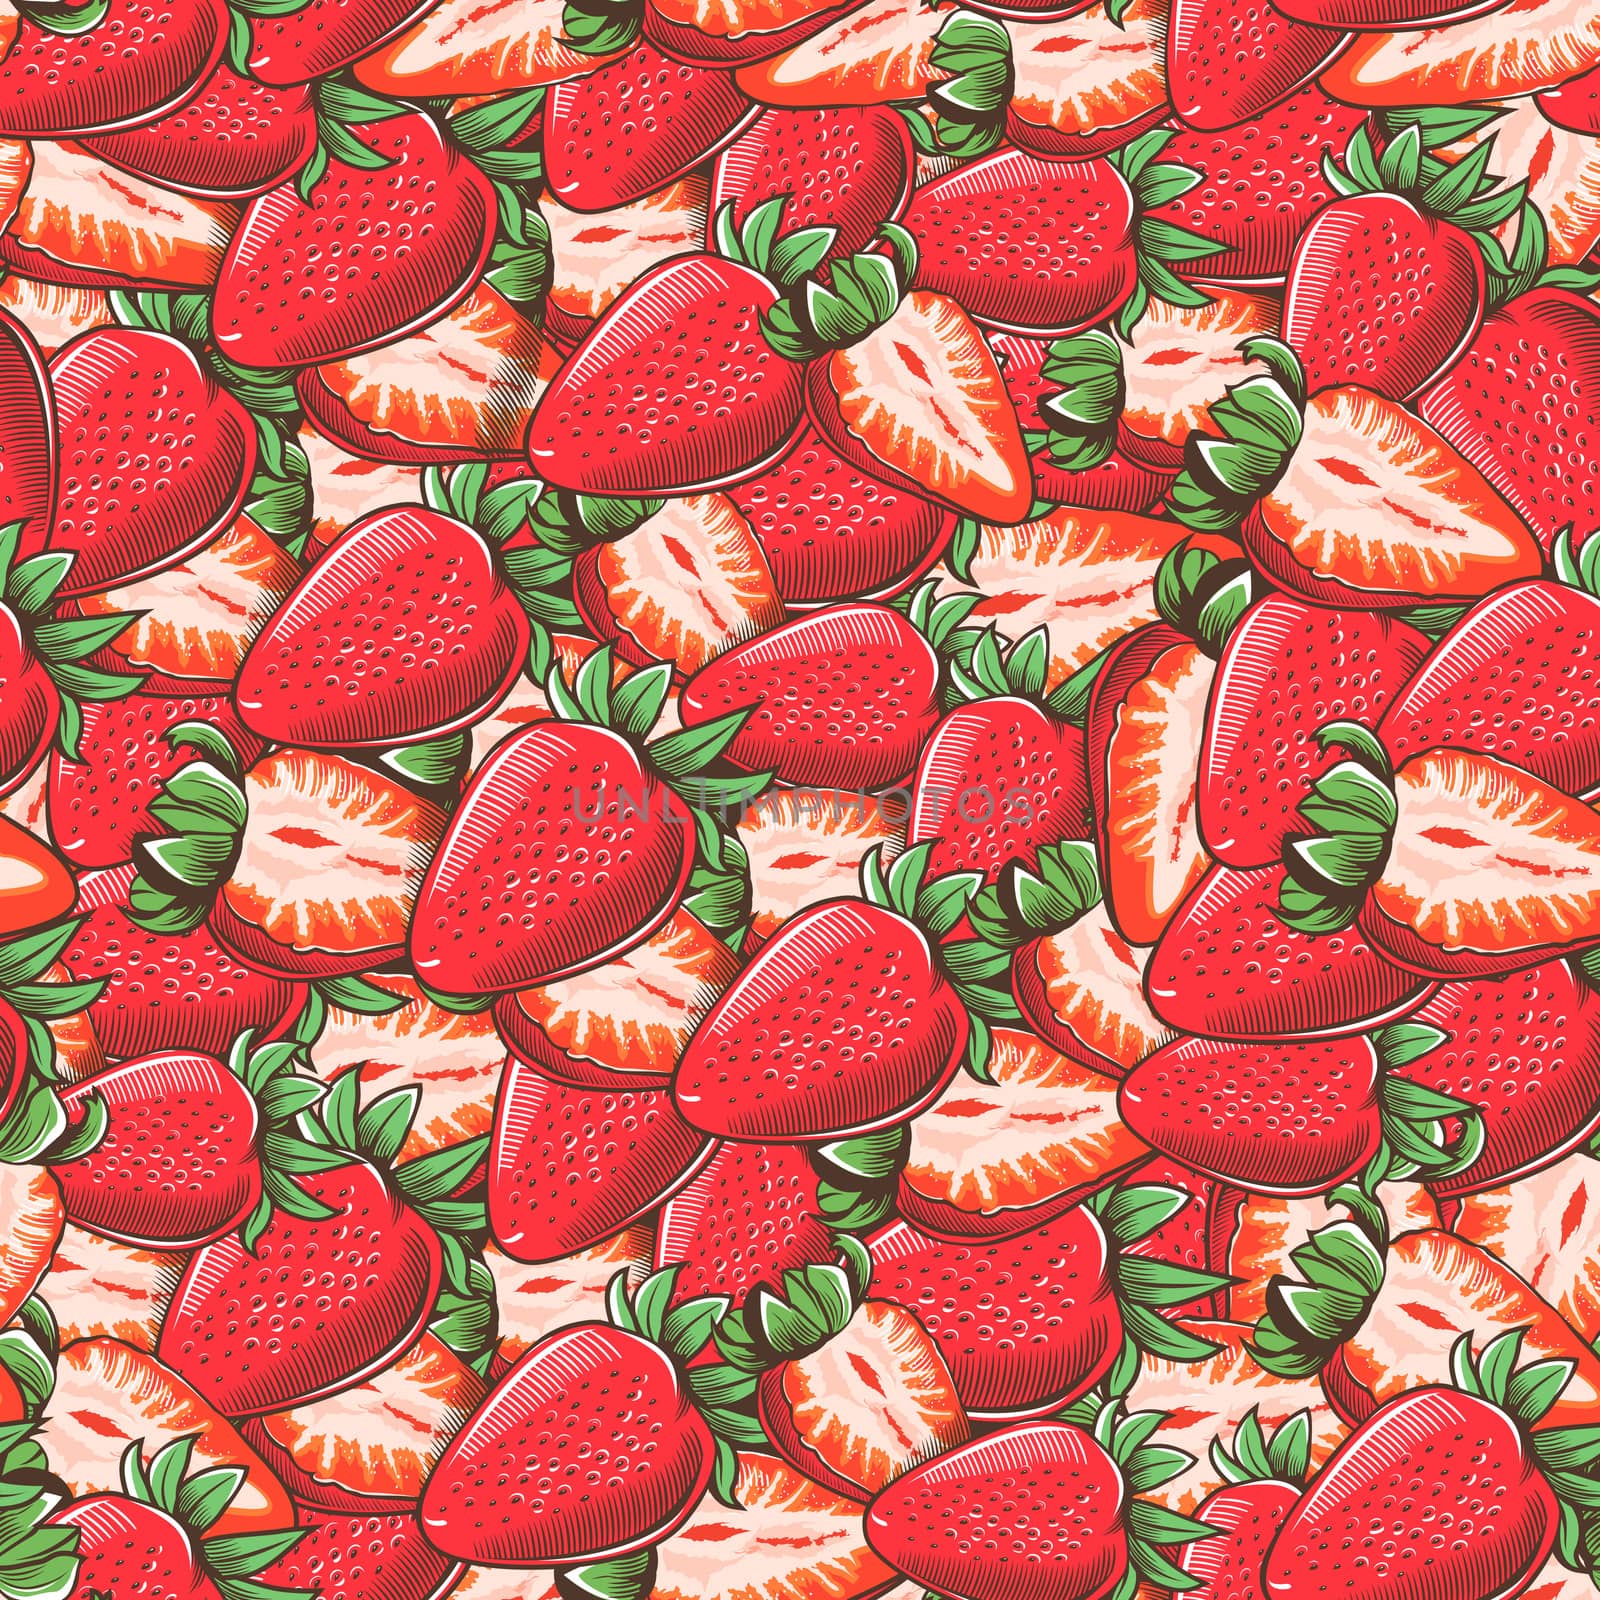 Vintage Strawberry Seamless Pattern by ConceptCafe